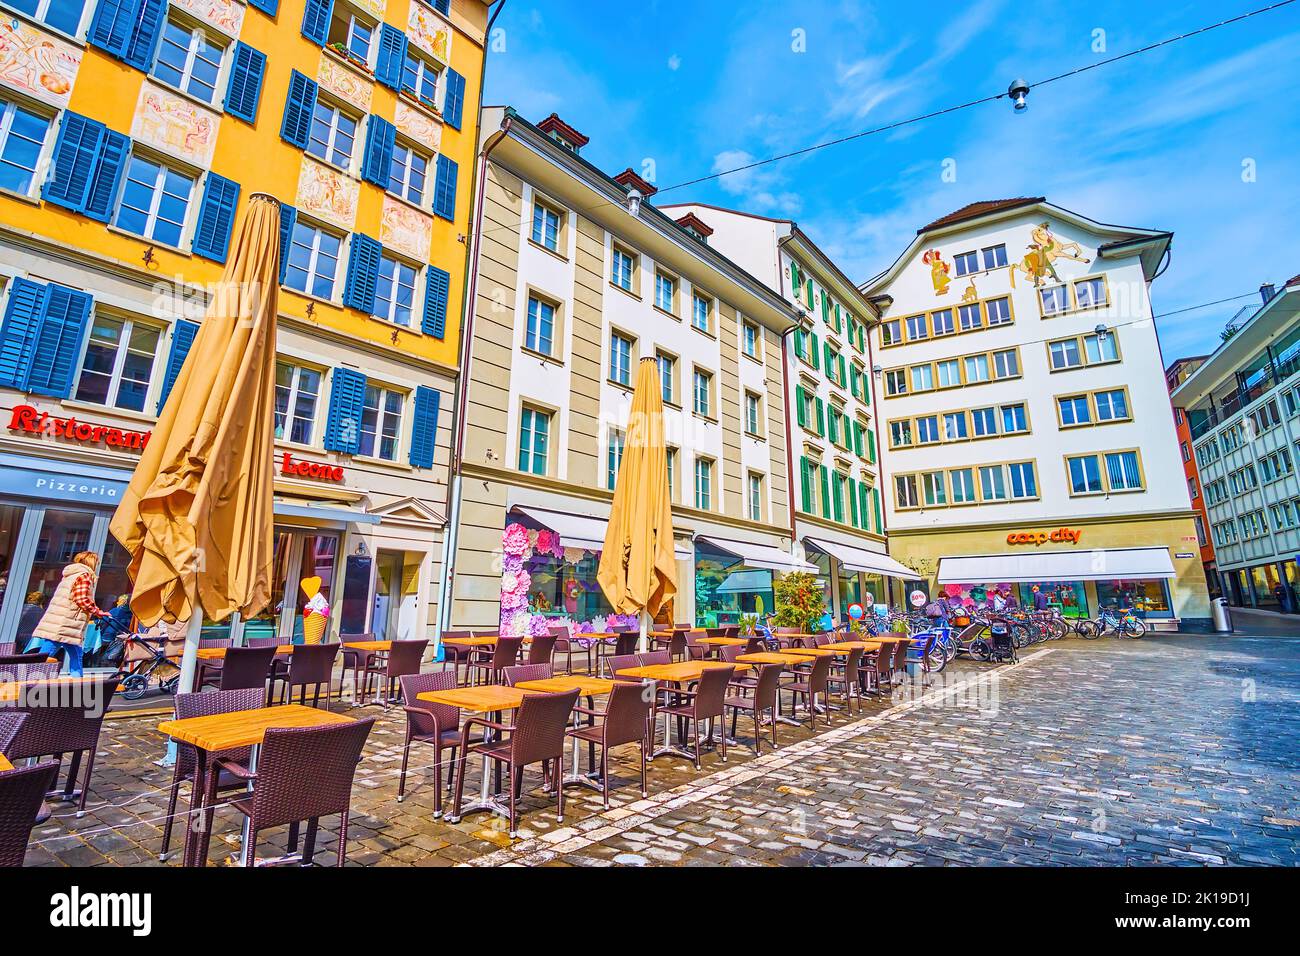 LUCERNE, SWITZERLAND - MARCH 30, 2022: Walk along medieval streets, enjoying frescoes on facades of houses, on March 30 in Lucerne, Switzerland Stock Photo